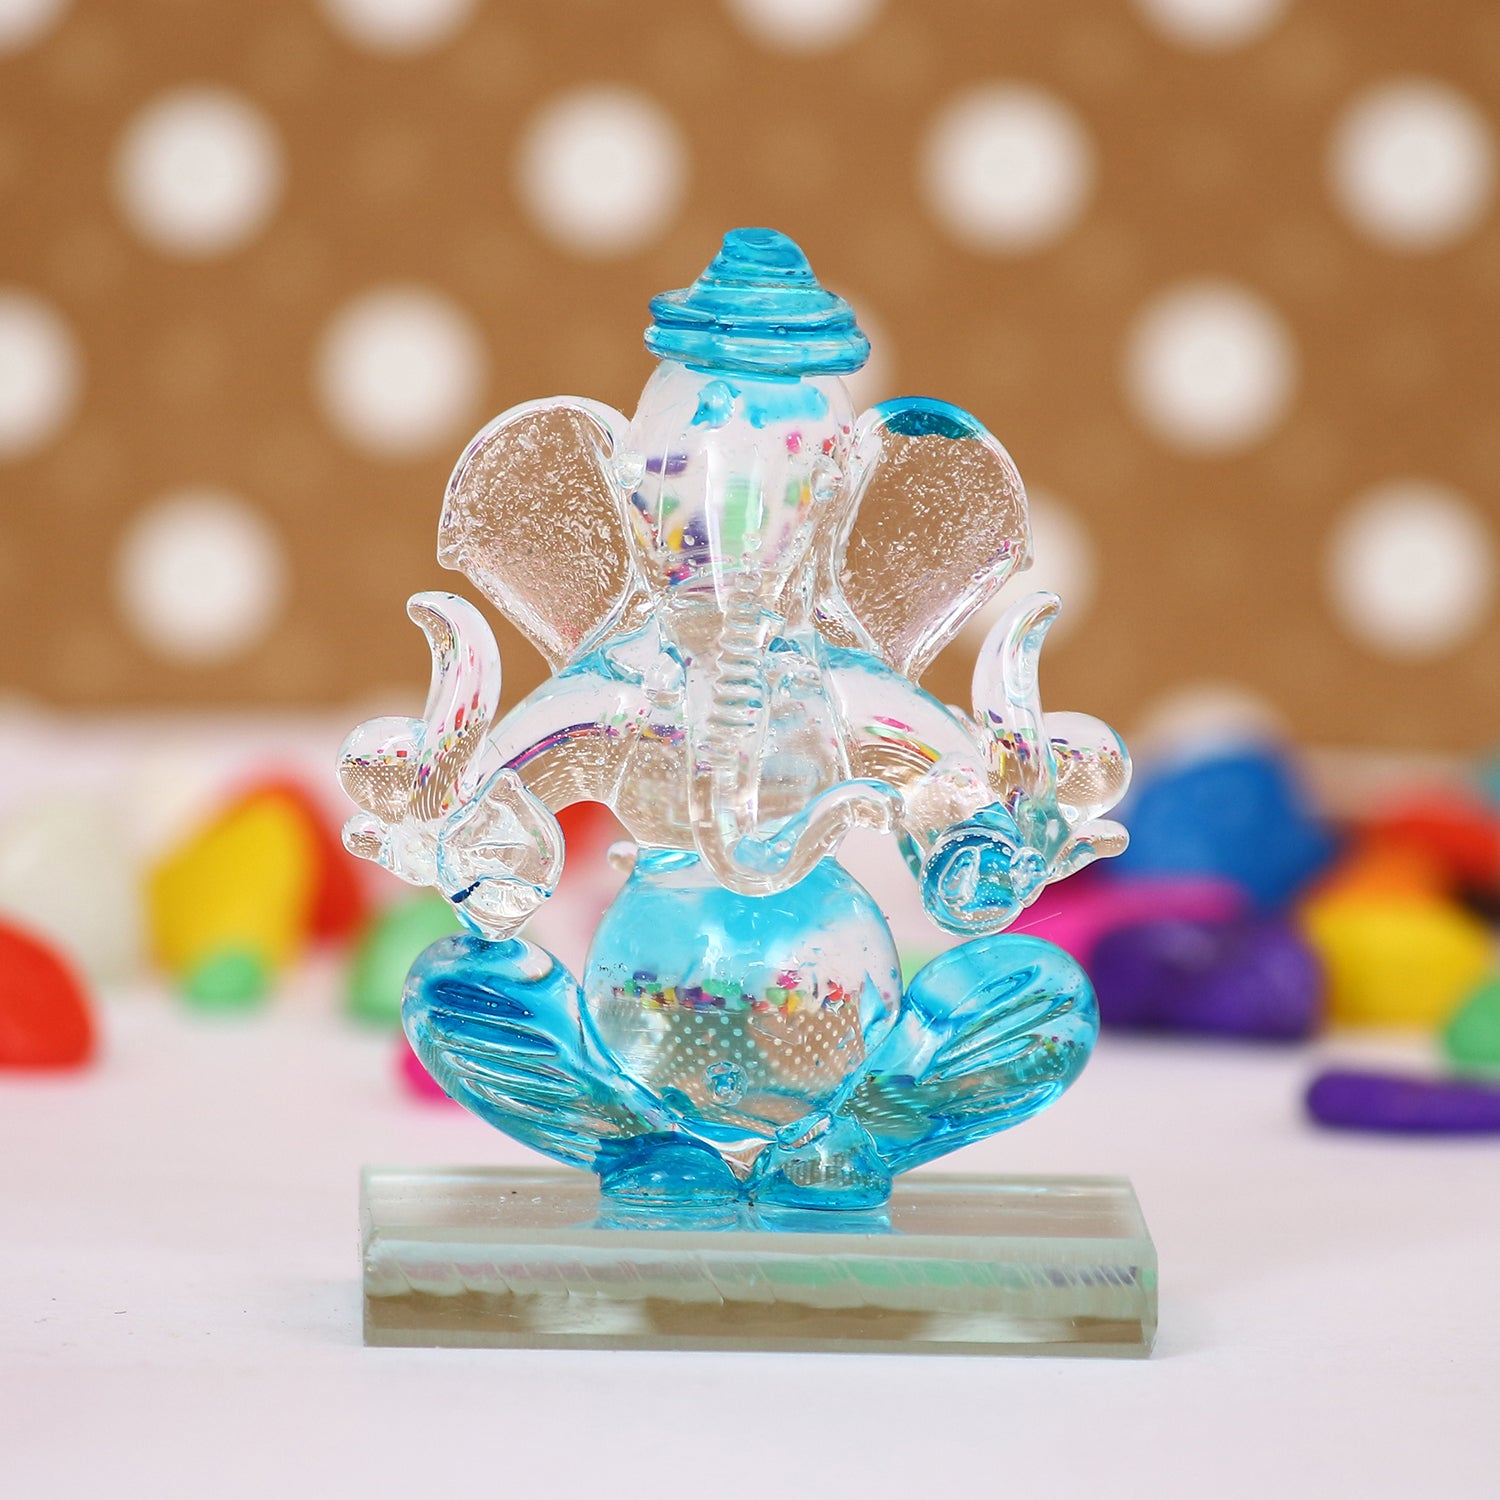 Sky Blue Transparent Double Sided Crystal Ganesha Idol For Home, Office and Car Dashboard 2